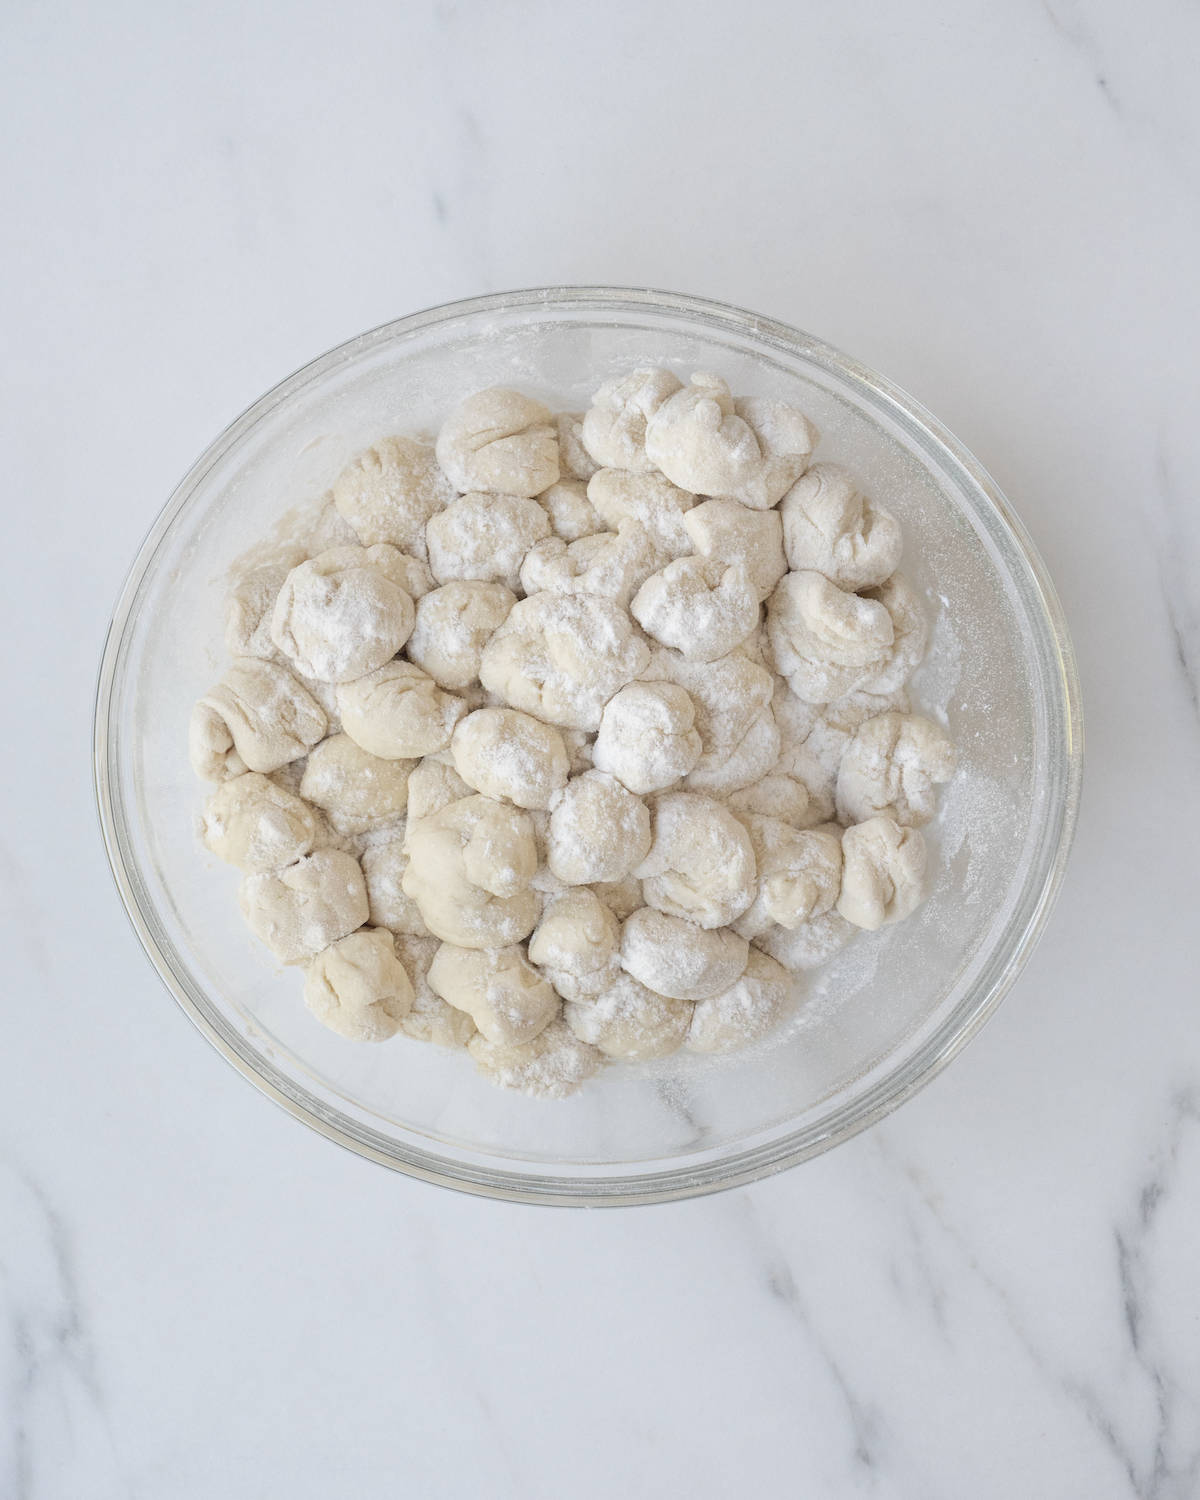 A clear white bowl of floured pizza dough separated in ½ inch cubes on a white countertop.